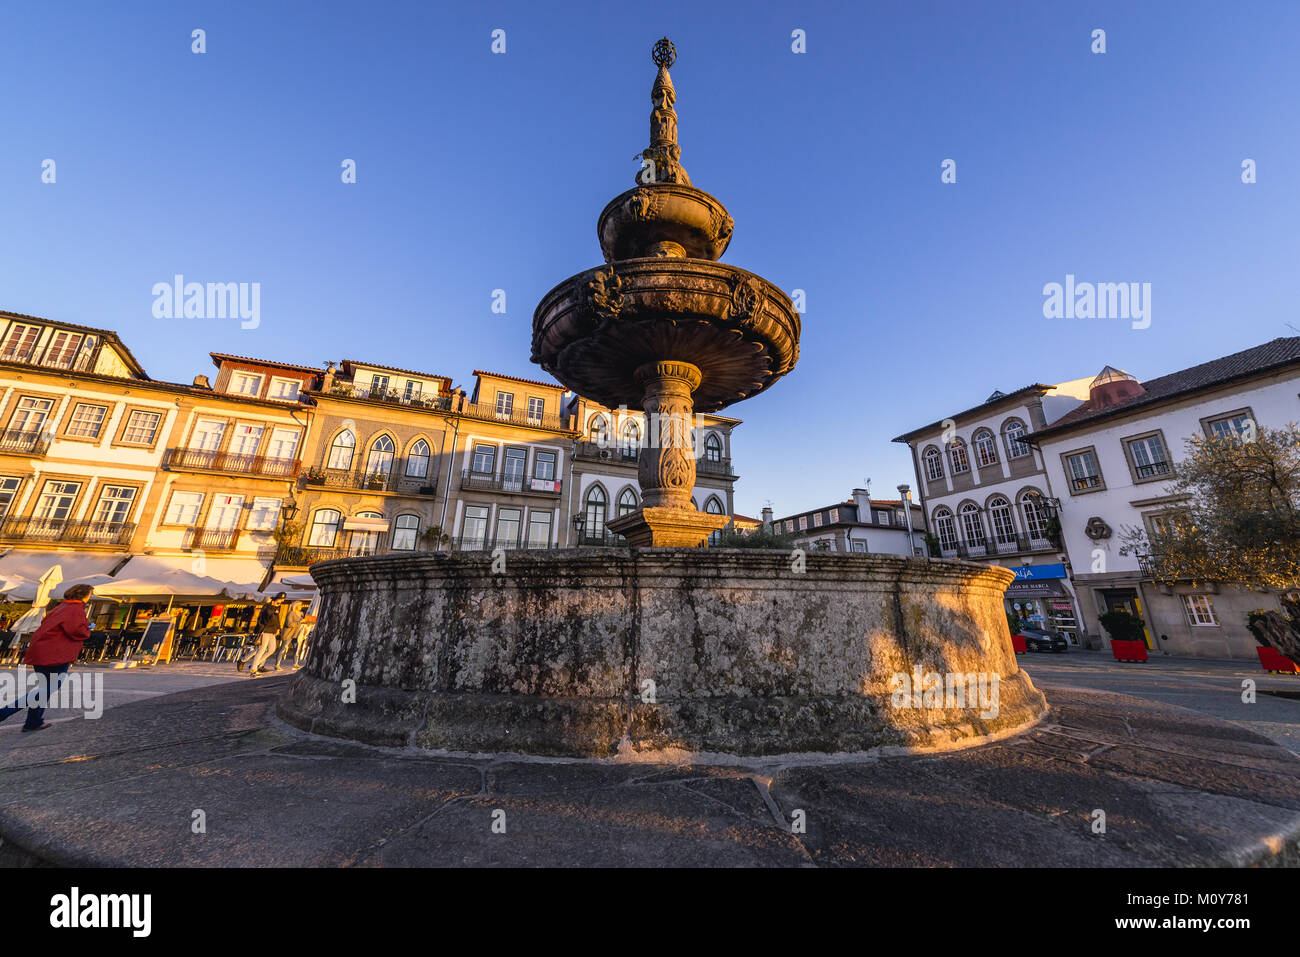 Noble Fountain dates from 1603 at Camoes Square in Ponte de Lima city, part of the district of Viana do Castelo, Norte region of Portugal Stock Photo